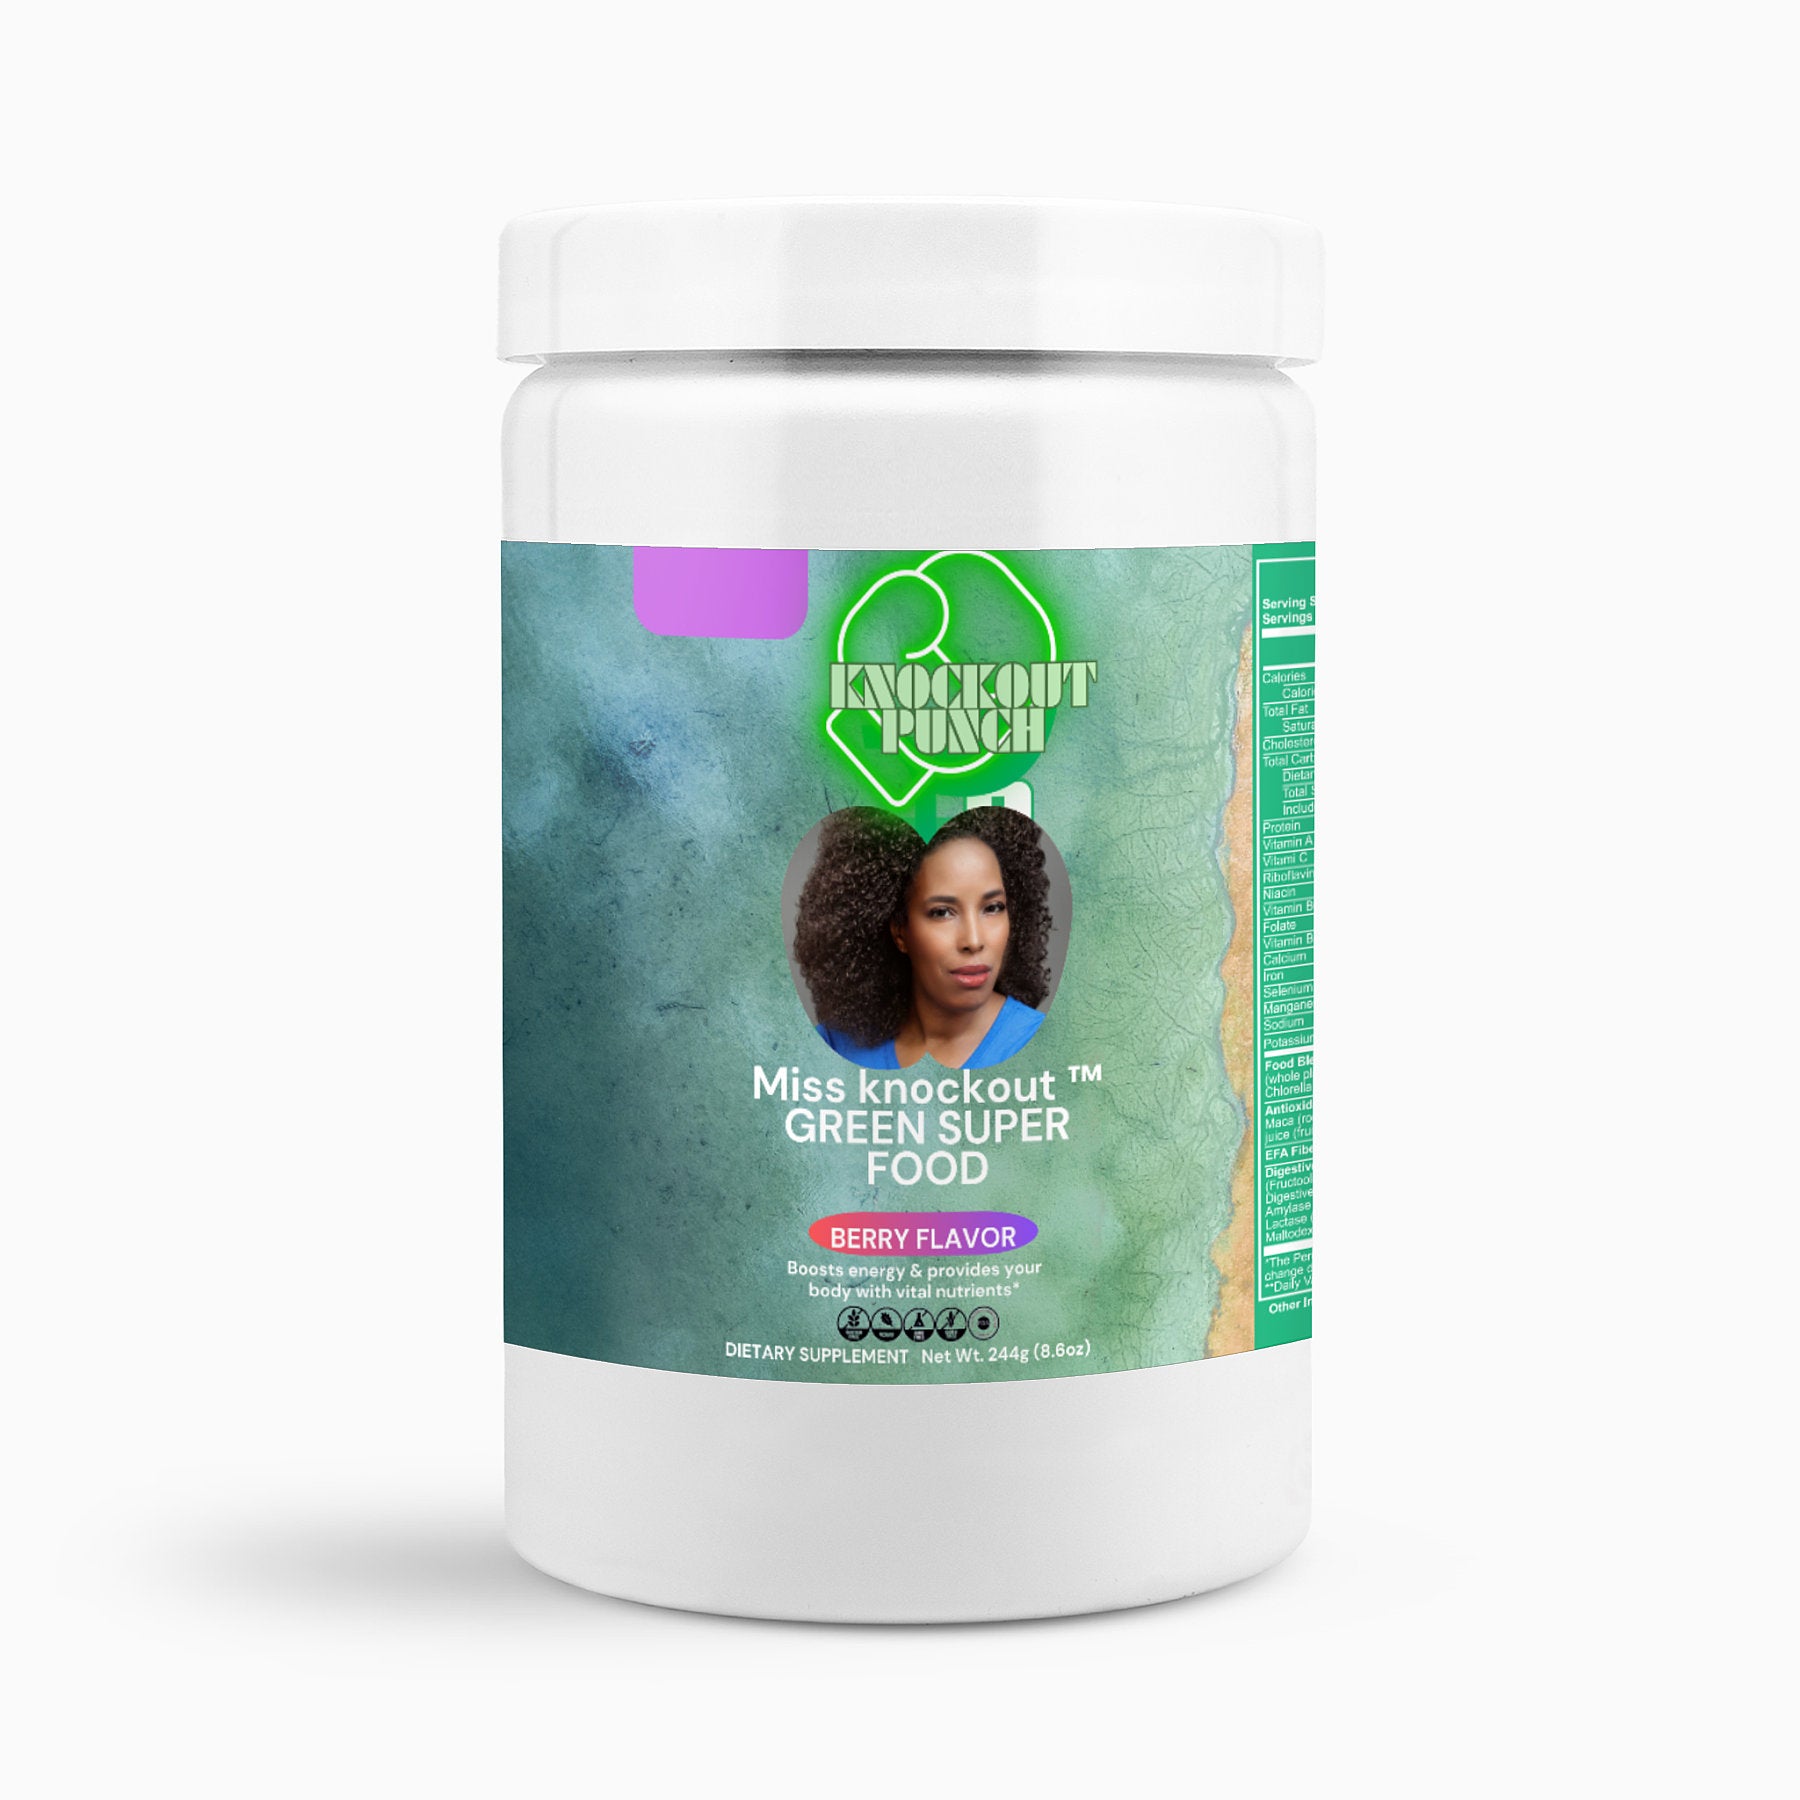 KNOCKOUT PUNCH Green Super Food - Berry Flavor Miss knockout ™ Supplements